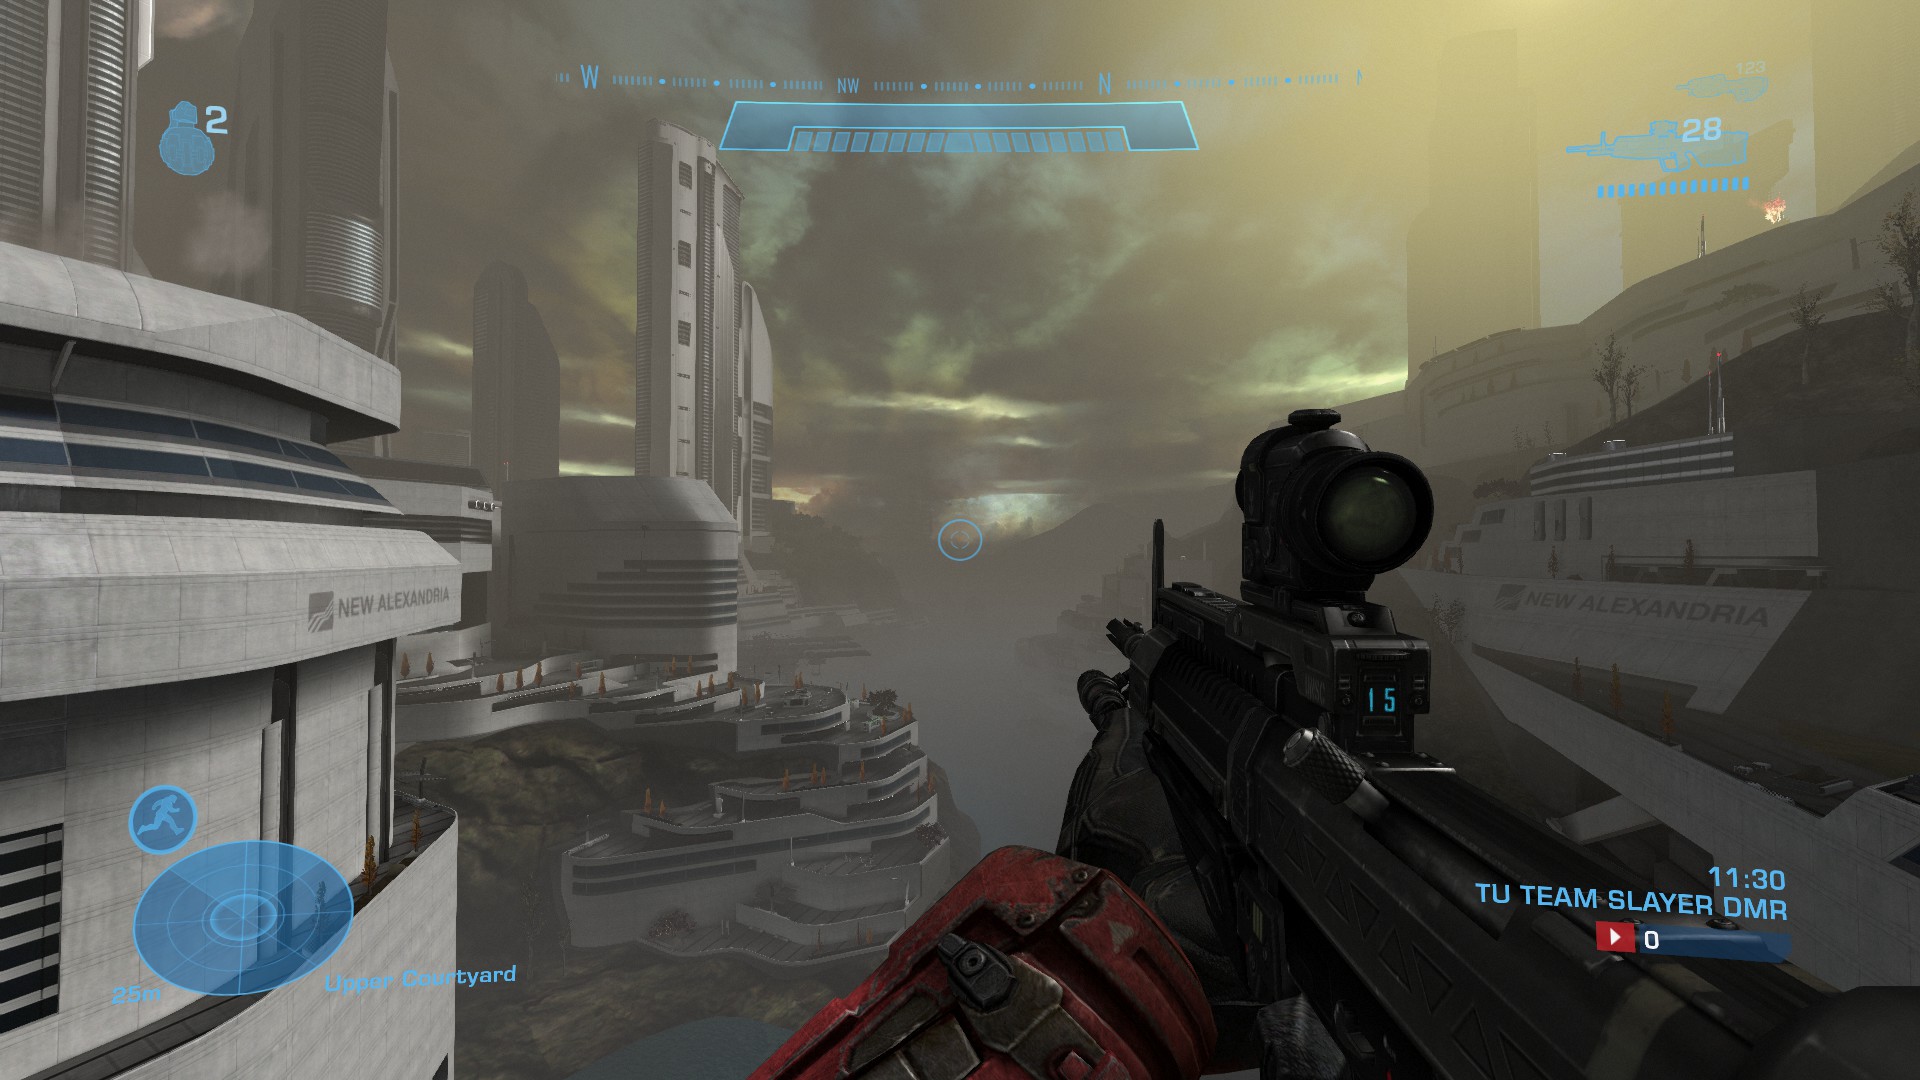 Halo: The Master Chief Collection How to Viewmodels in game guide - Halo: Reach - B270E9F